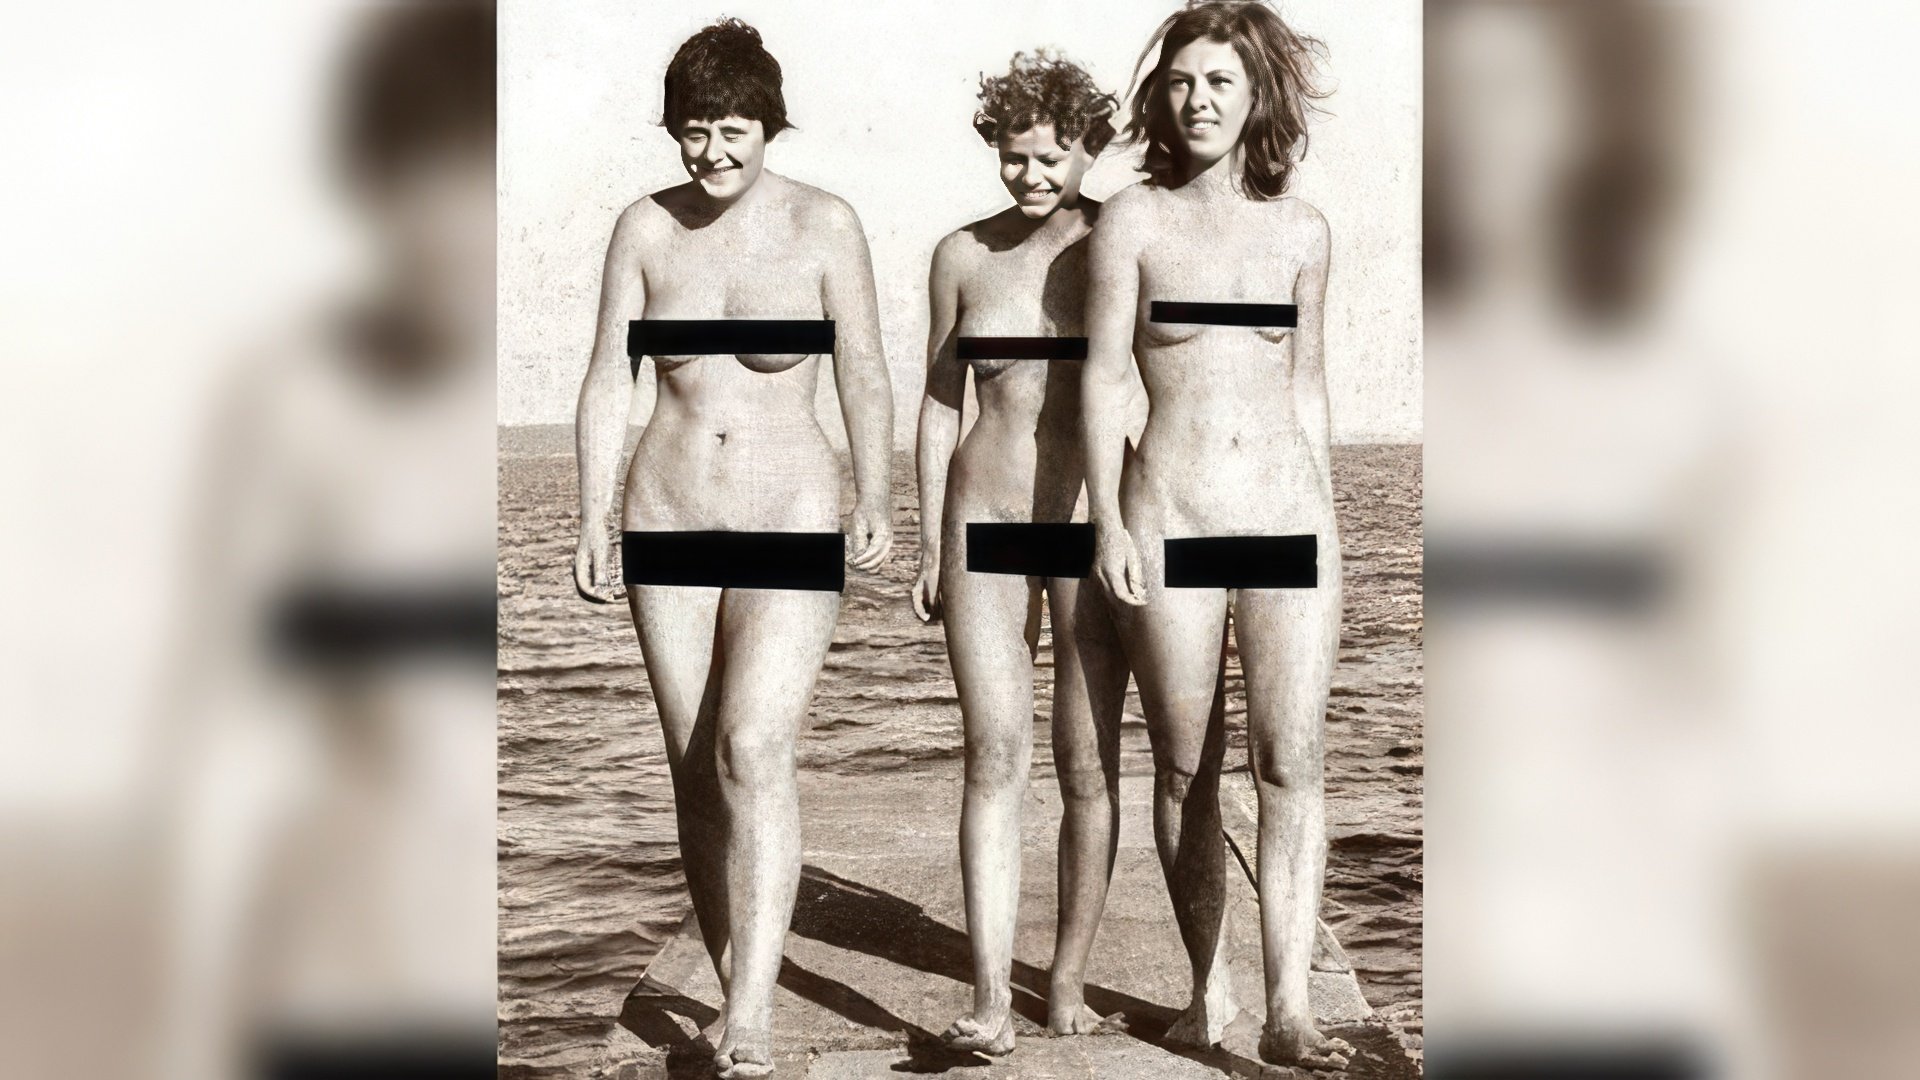 Angela Merkel (left) in her youth with friends on a nudist beach